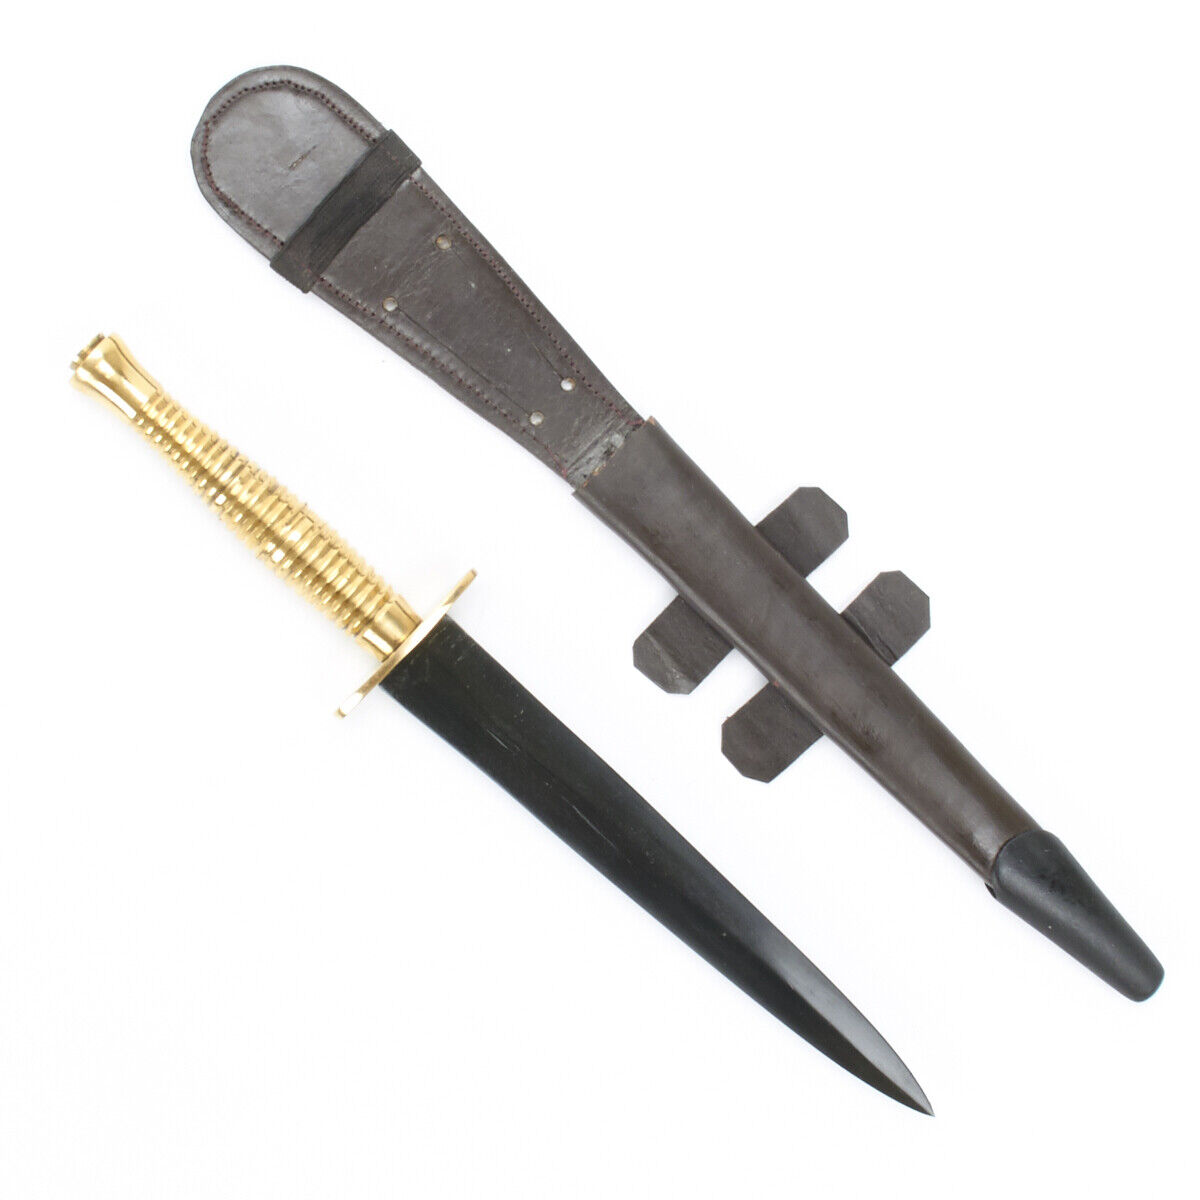 British WWII Fairbairn–Sykes Fighting Knife with Scabbard and Brass Grip